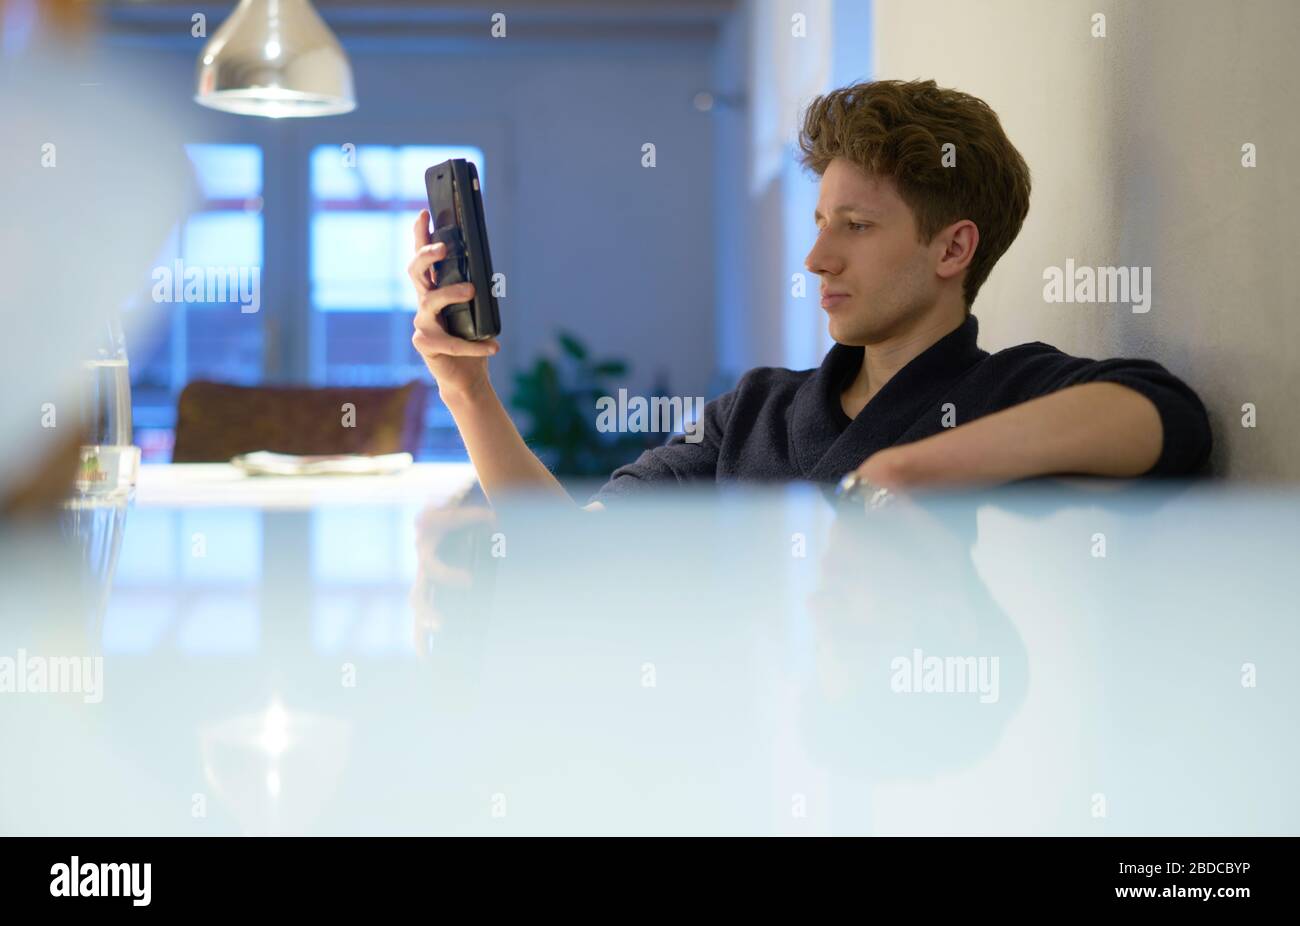 portrait of young handsome man sitting in his apartment and holding a cell phone in his hand Stock Photo